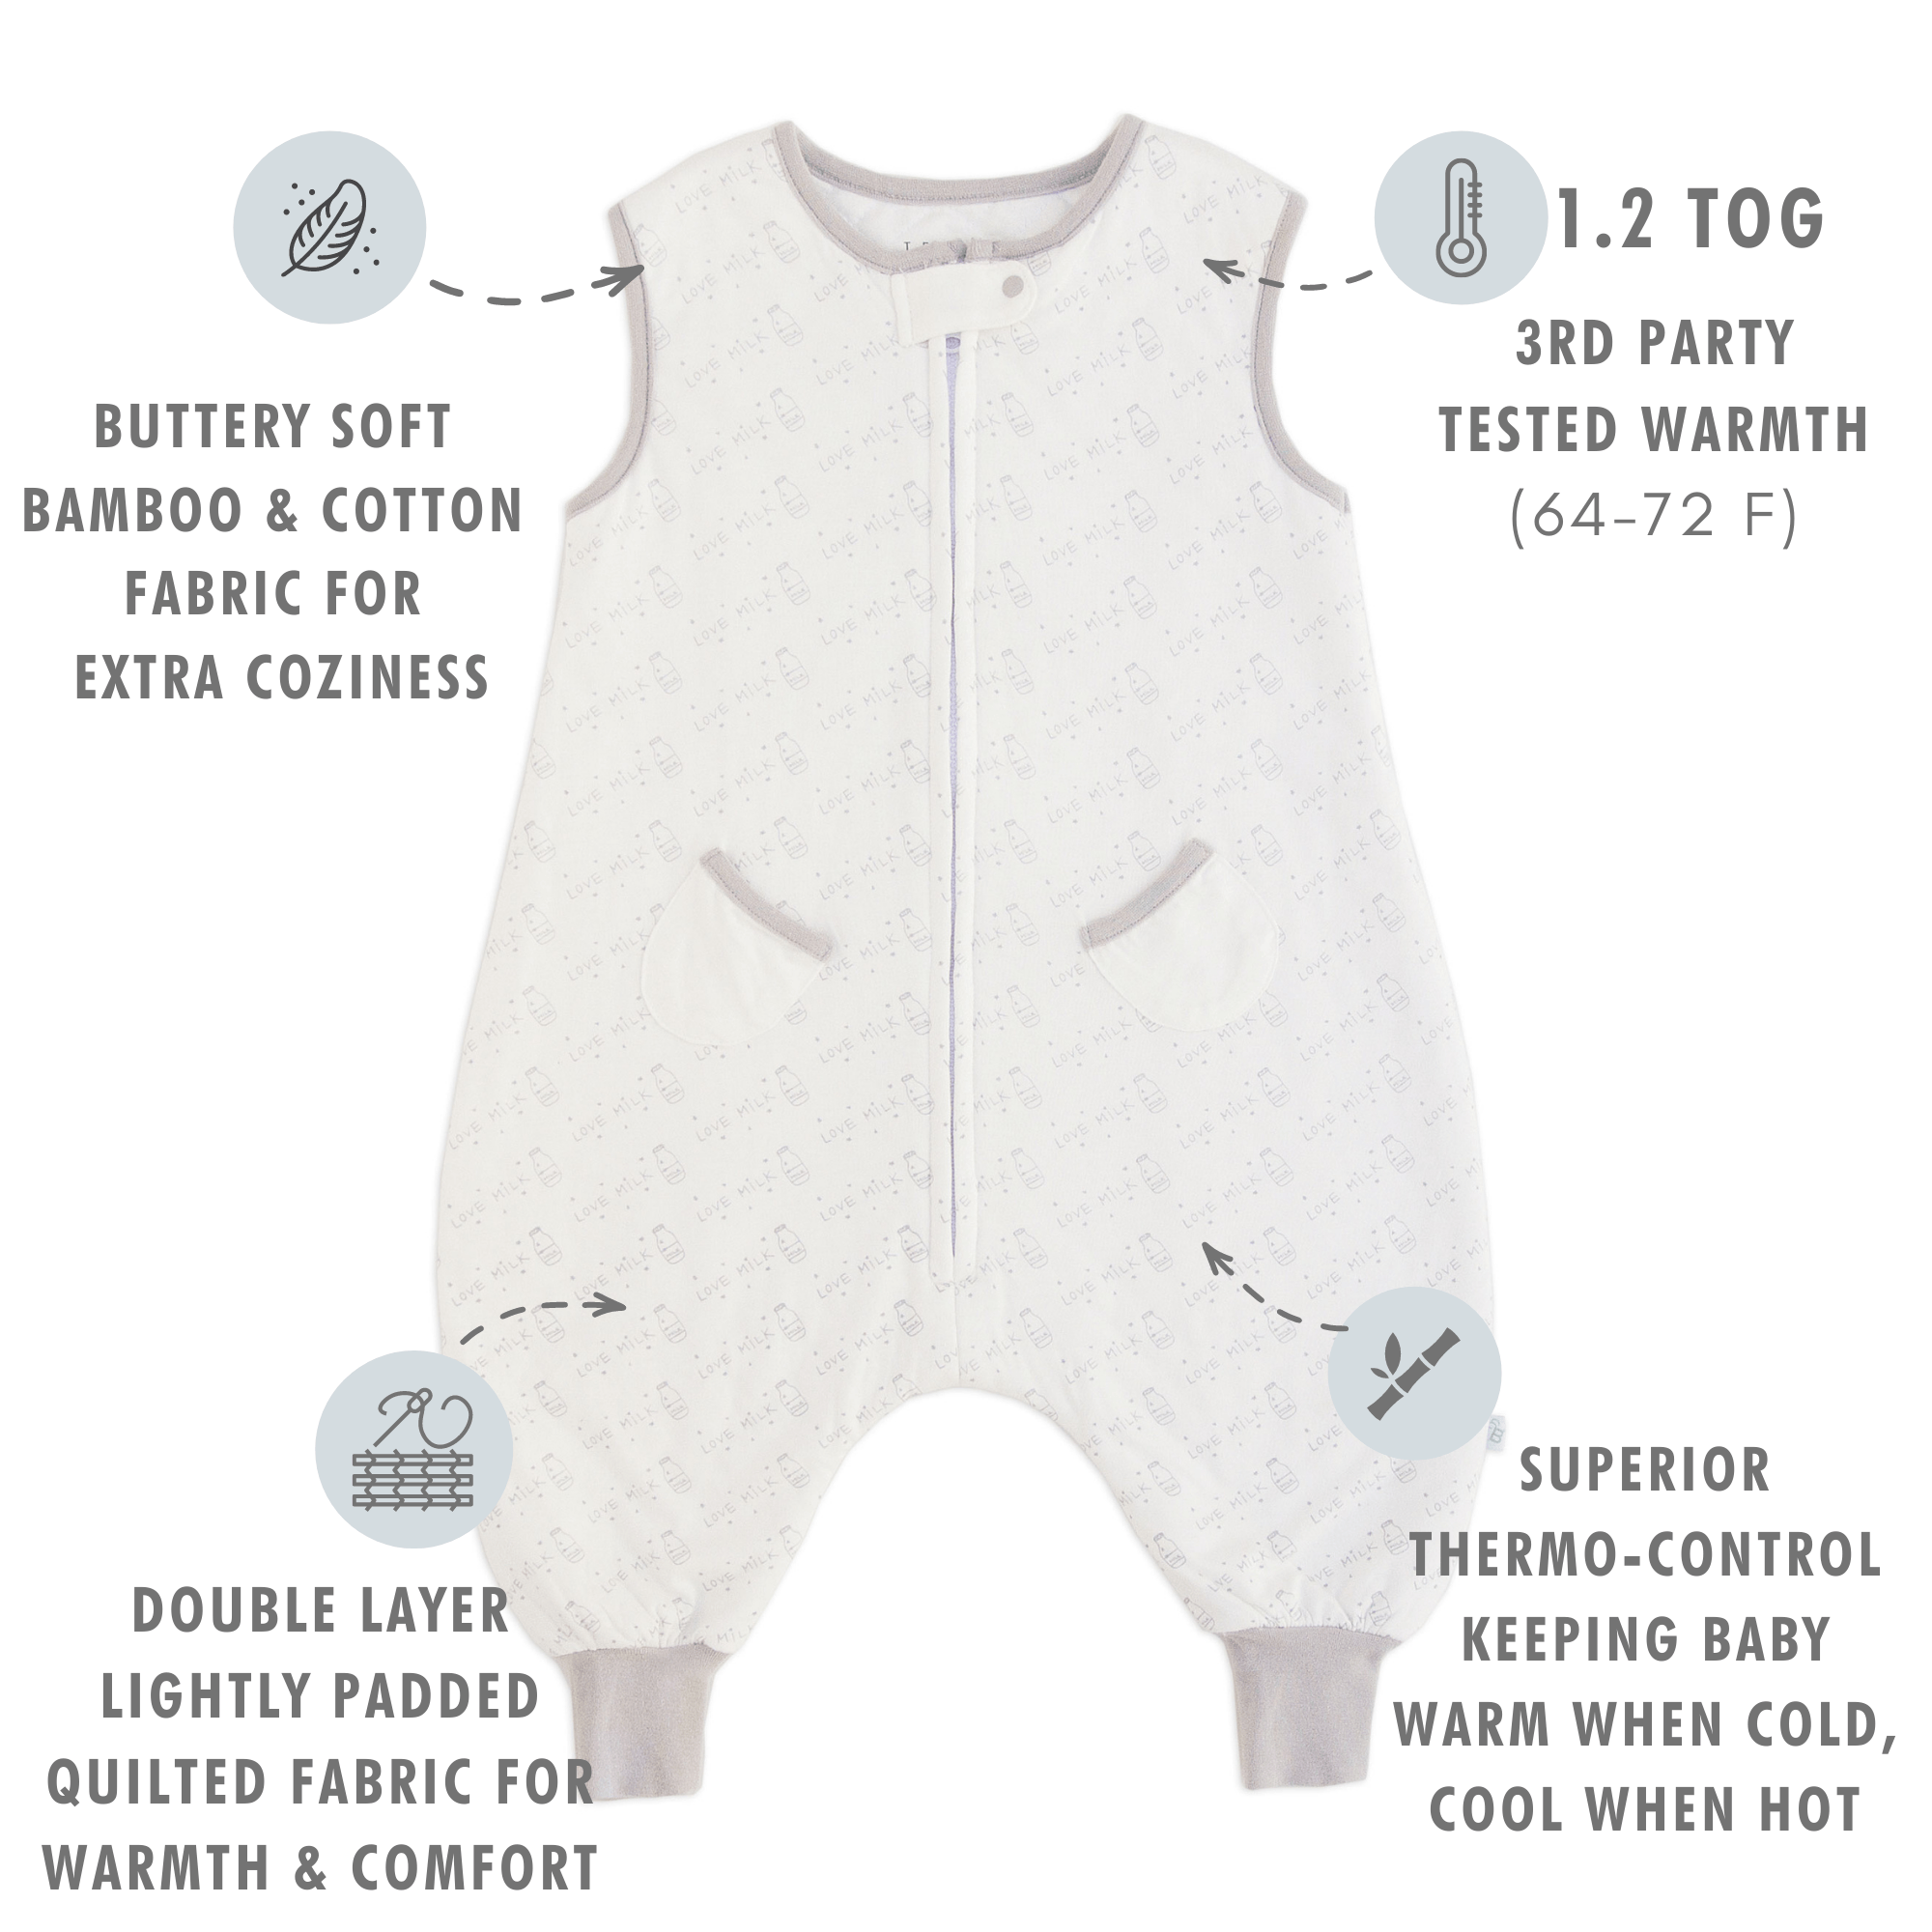 Tealbee Love Milk Dreamsuit - buttery soft bamboo and cotton fabric for extra coziness, 1.2 TOG 3rd party tested warmth (64 to 72 Fahrenheit), double layer lightly padded quilted fabric for warmth and comfort, superior thermo-control keeping baby warm when cold and cool when hot